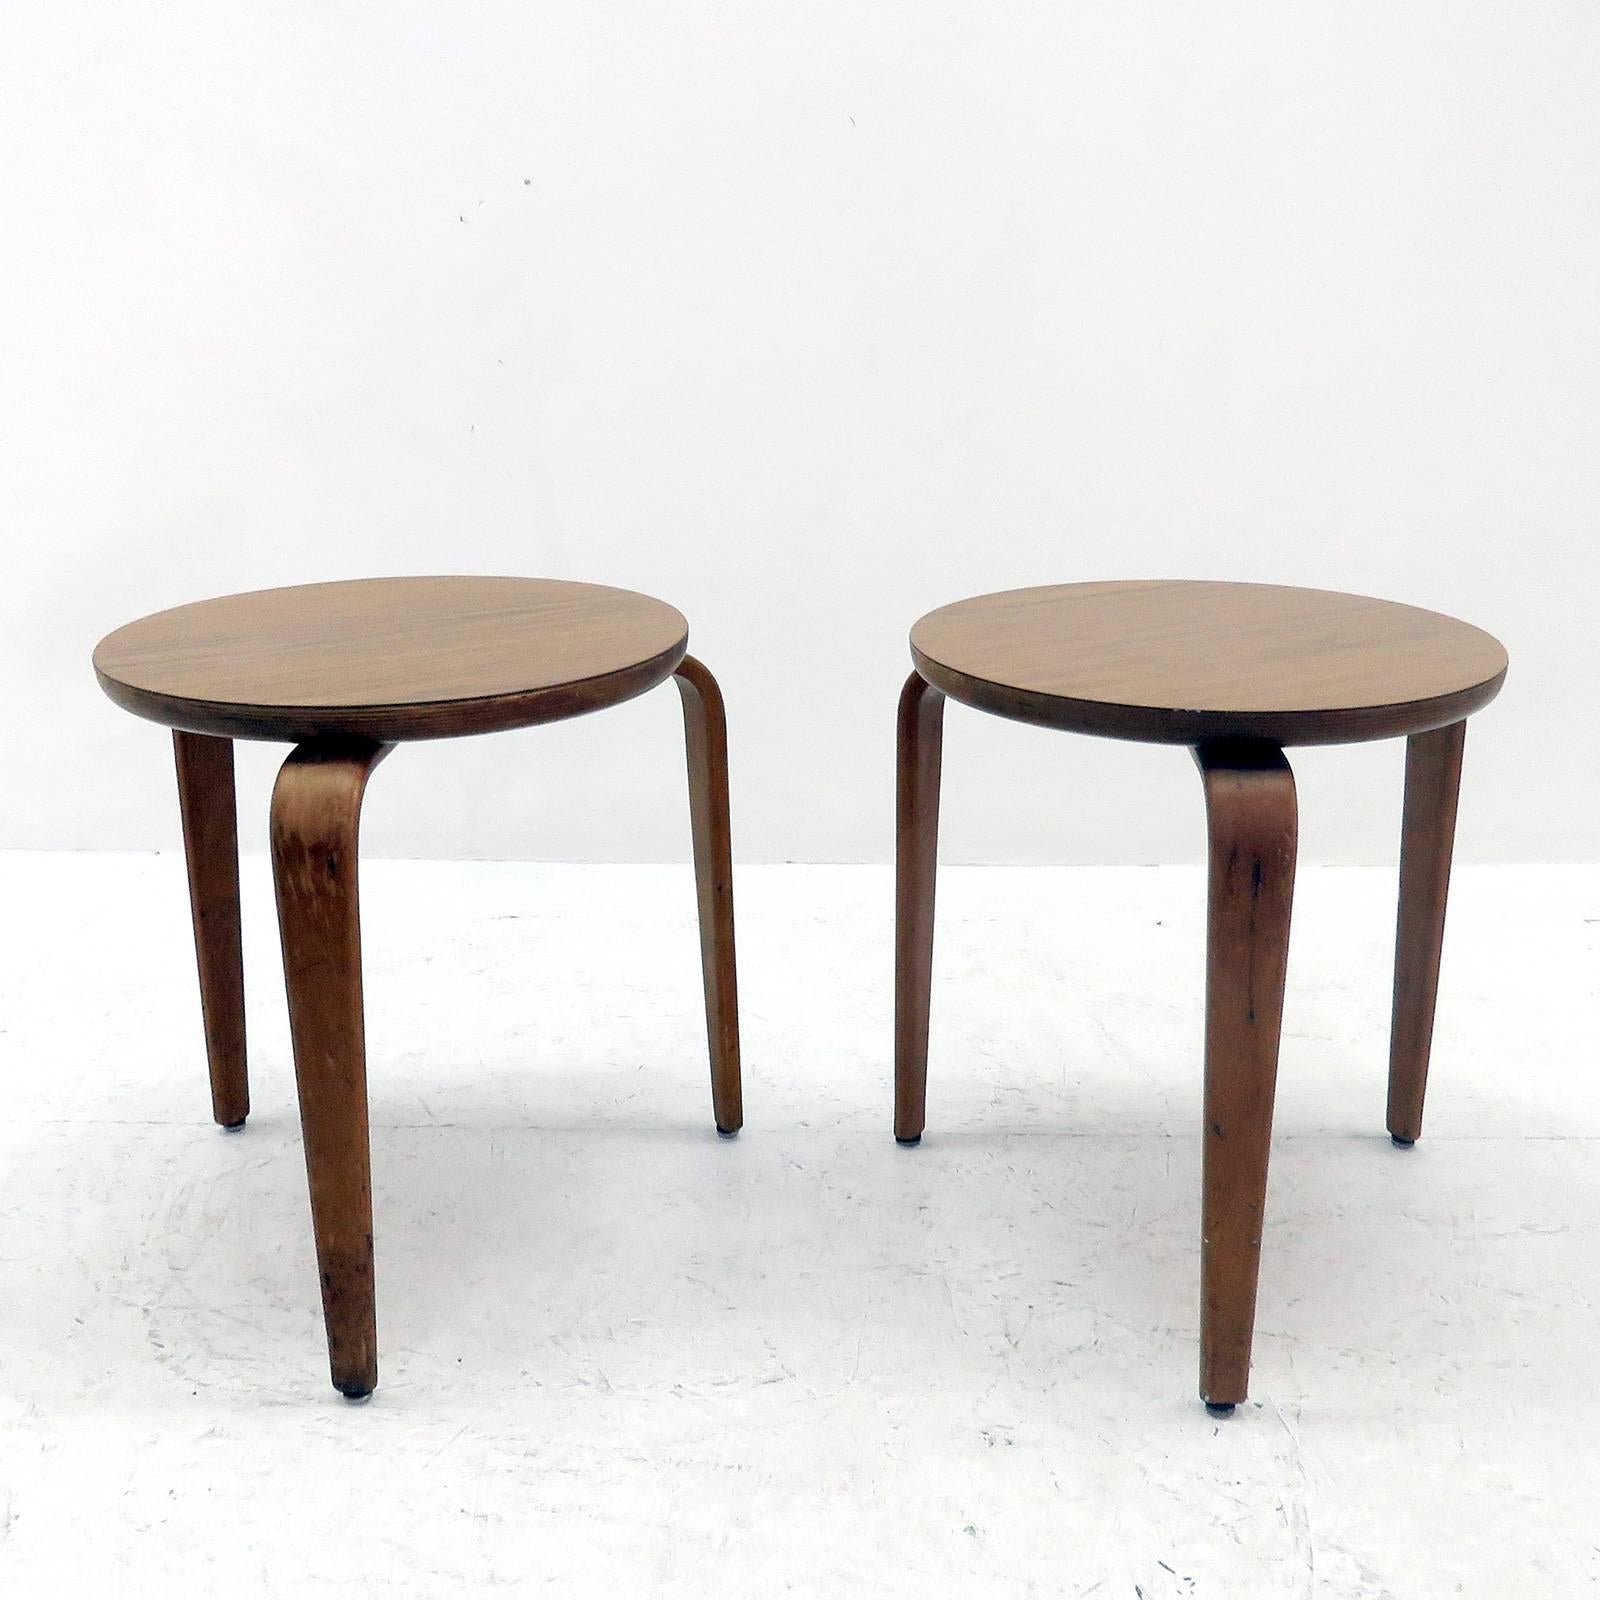 Wonderful pair of three legged bentwood stools/side tables by Thonet New York, with wood laminate top finish, marked.